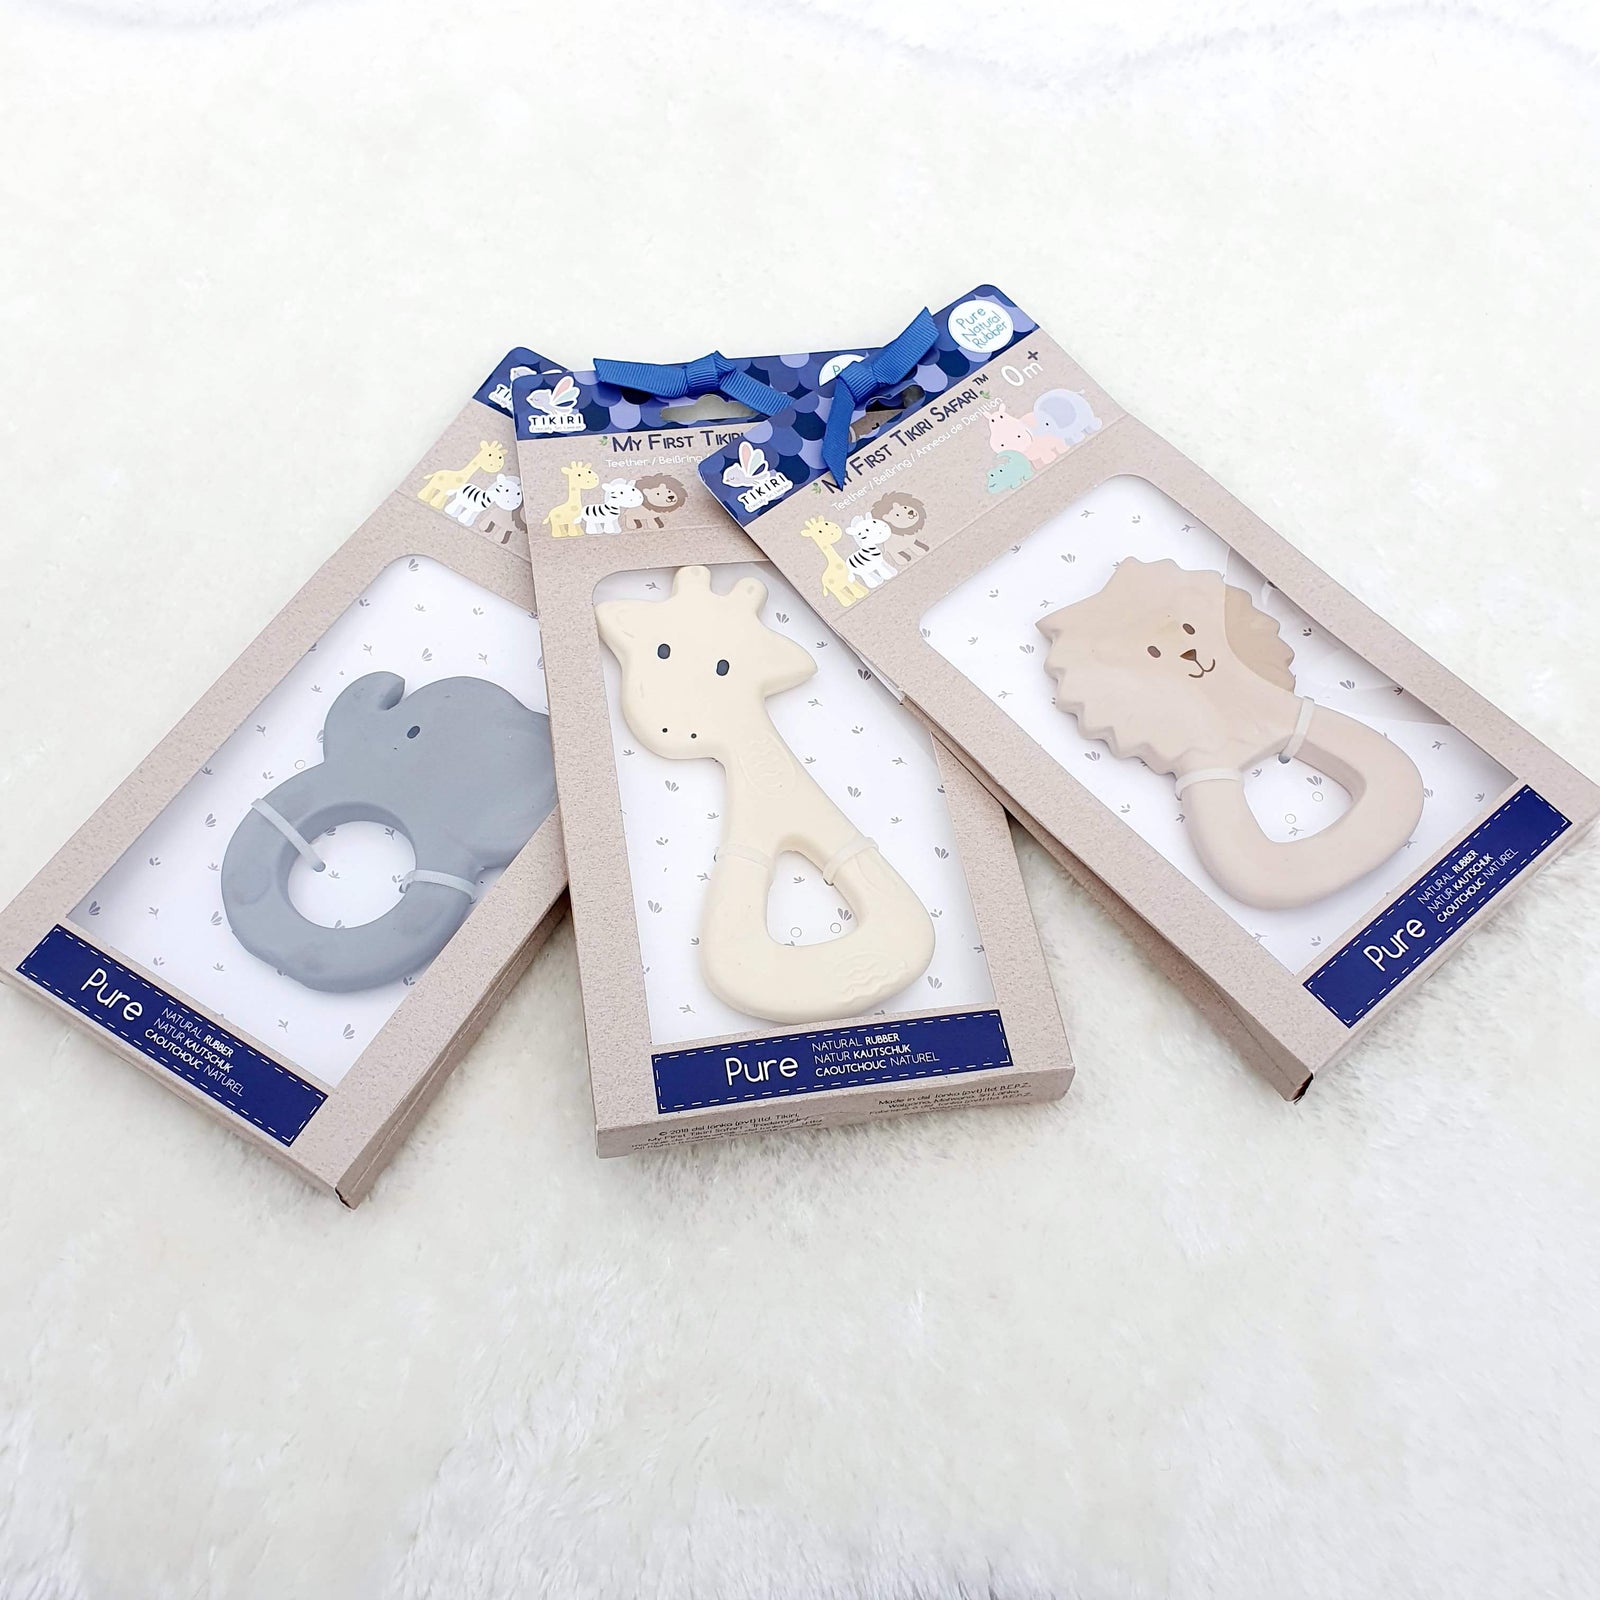 Elephant Natural Rubber Teether Ring Gift Boxed